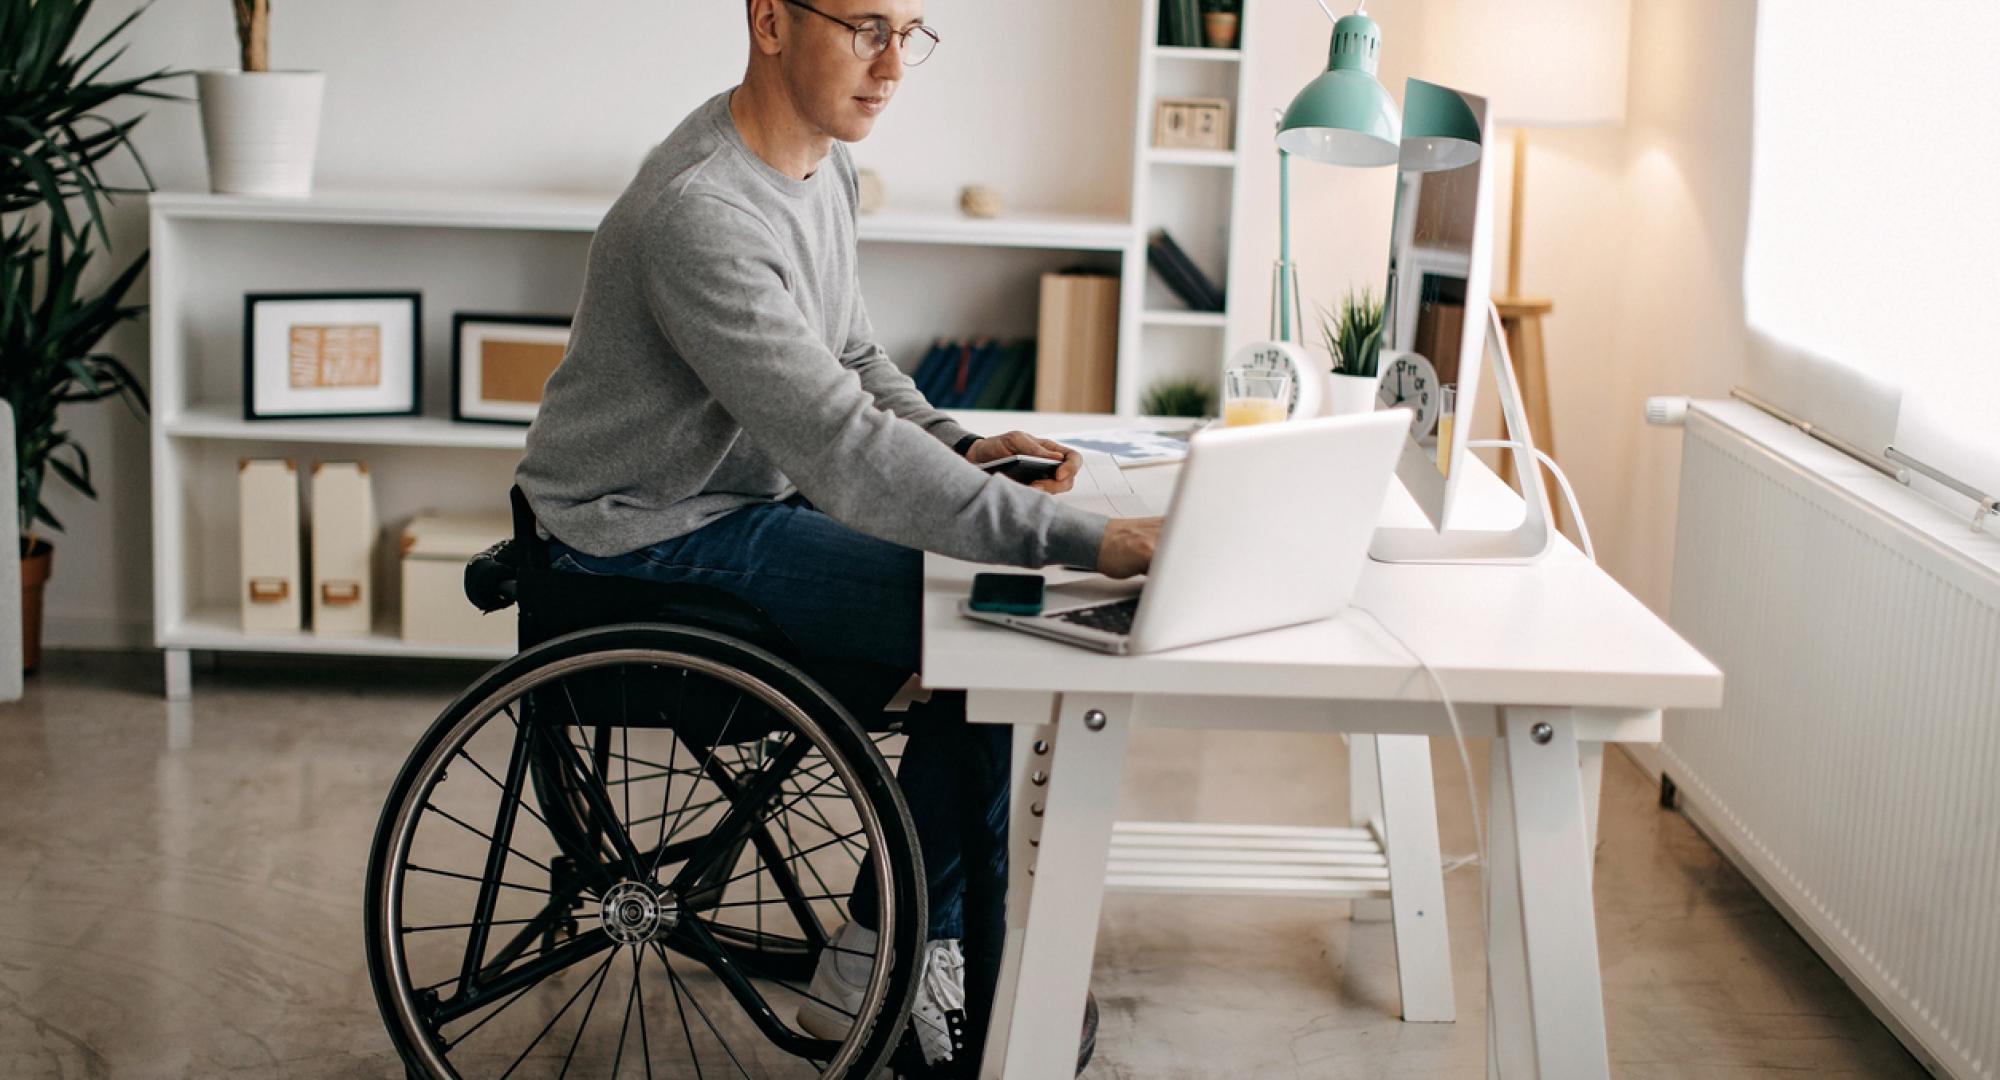 Young man with disabilities working on computer